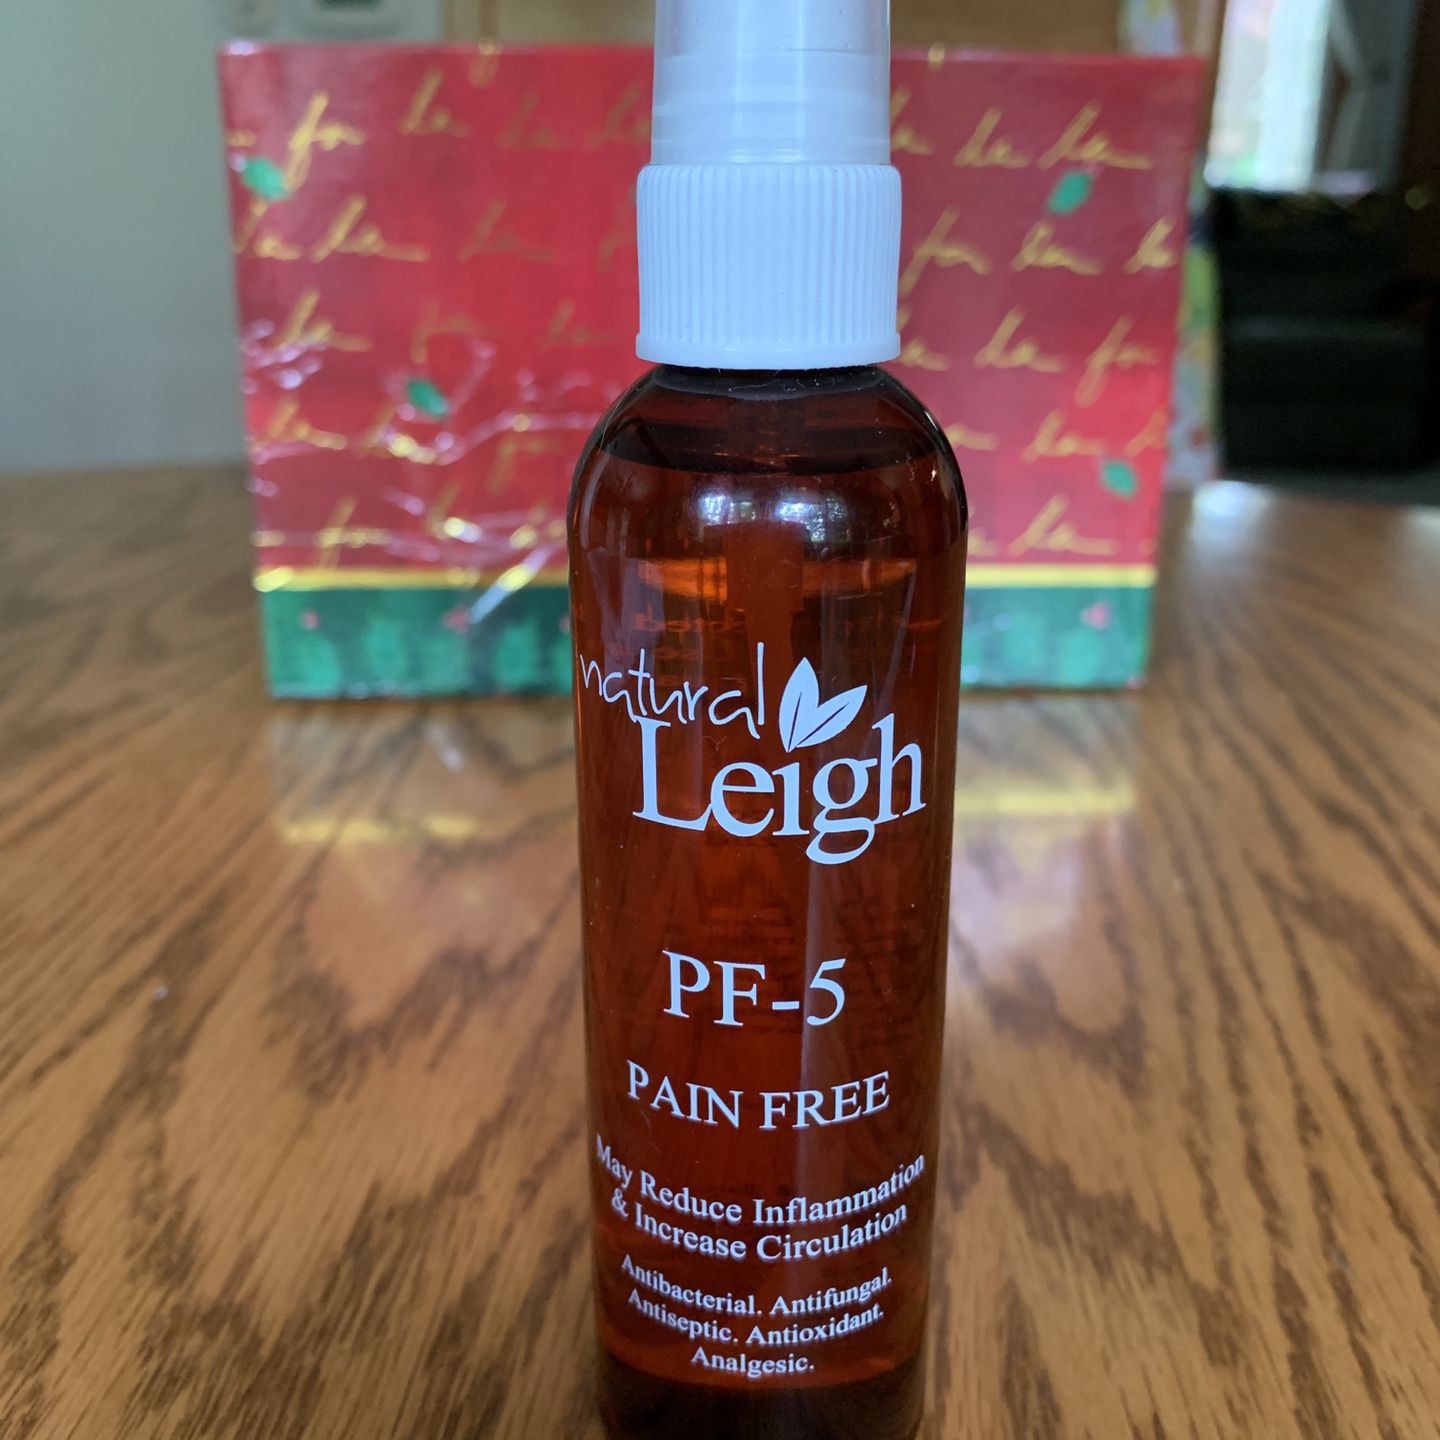 Natural Leigh Pain Free